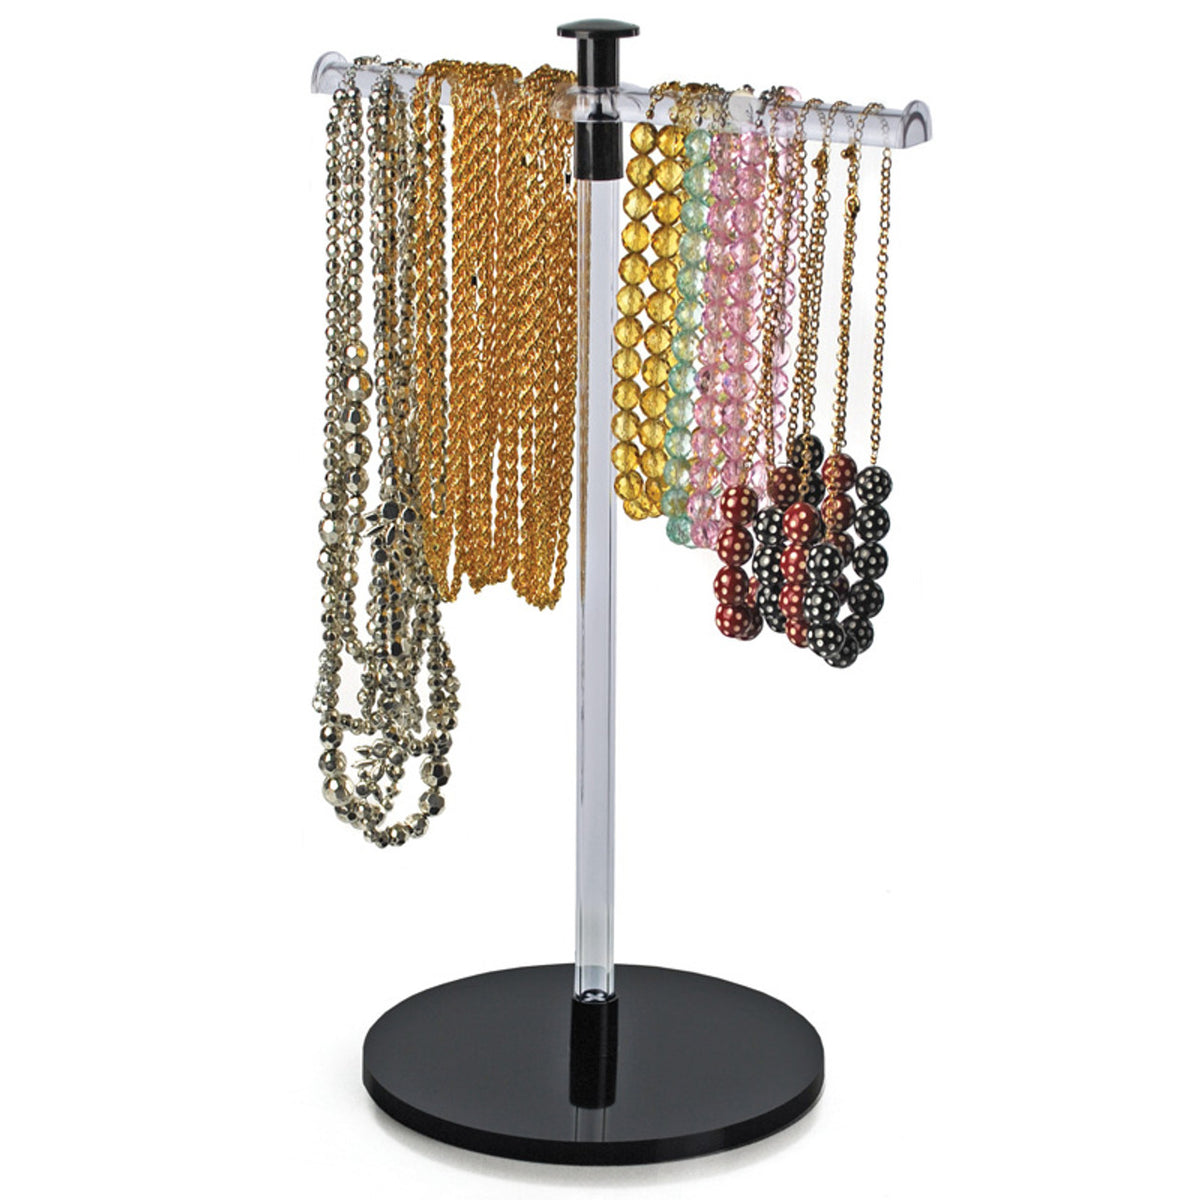 5-Pole Vertical Revolving Counter Bracelet Display. Overall Size